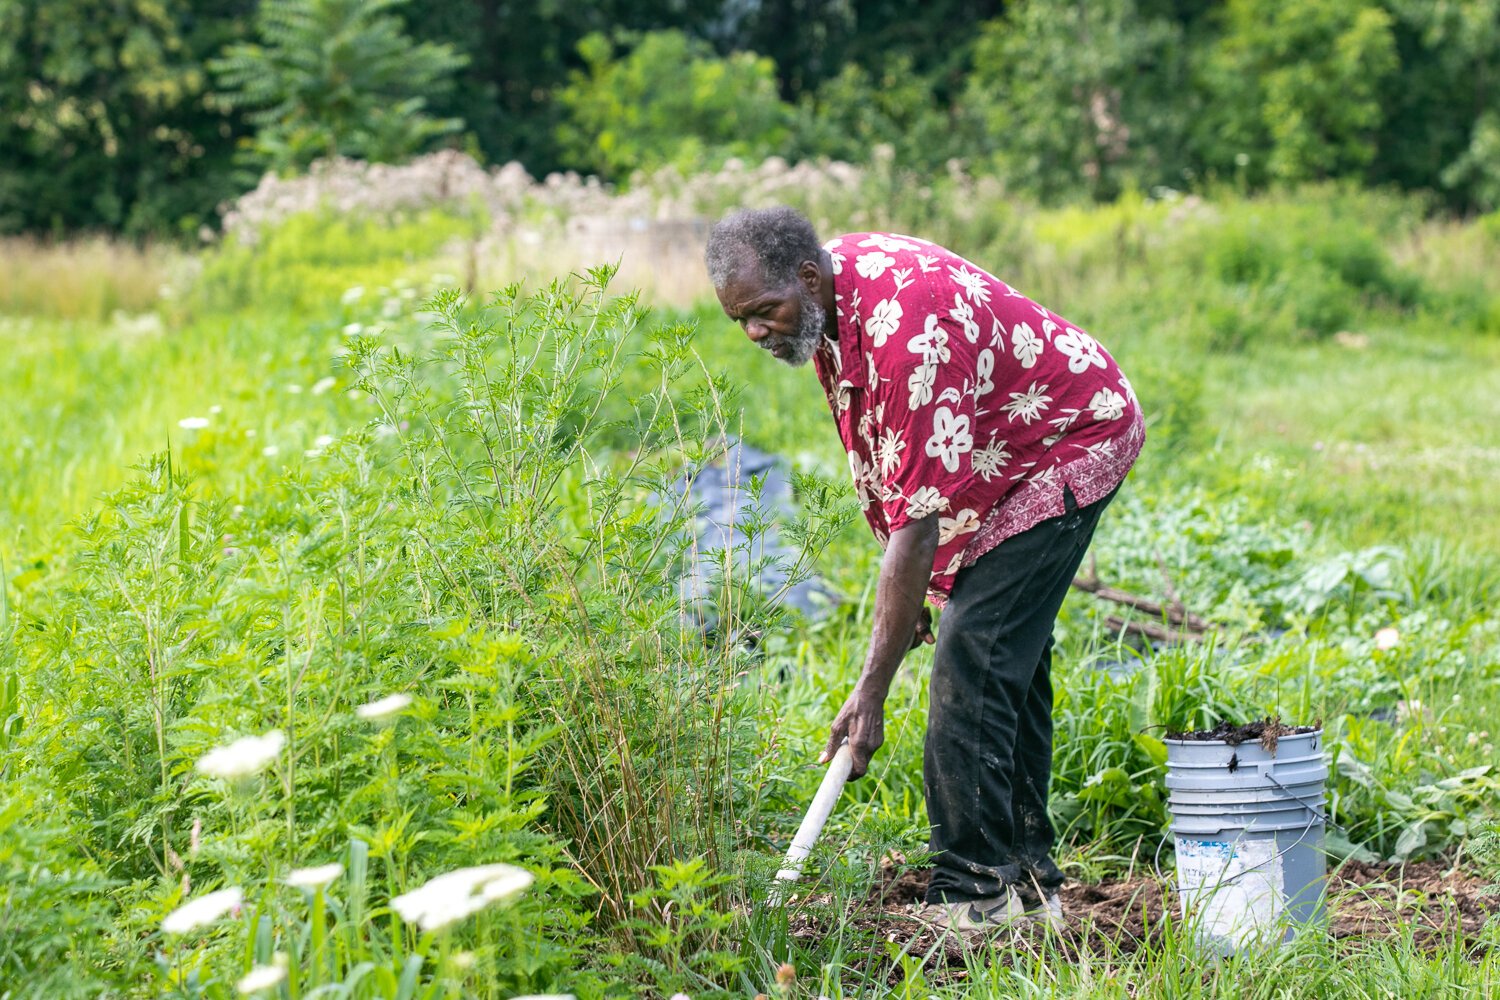 Ephraim Smiley of Smiley’s Garden Angels has been farming for more than 25 years.